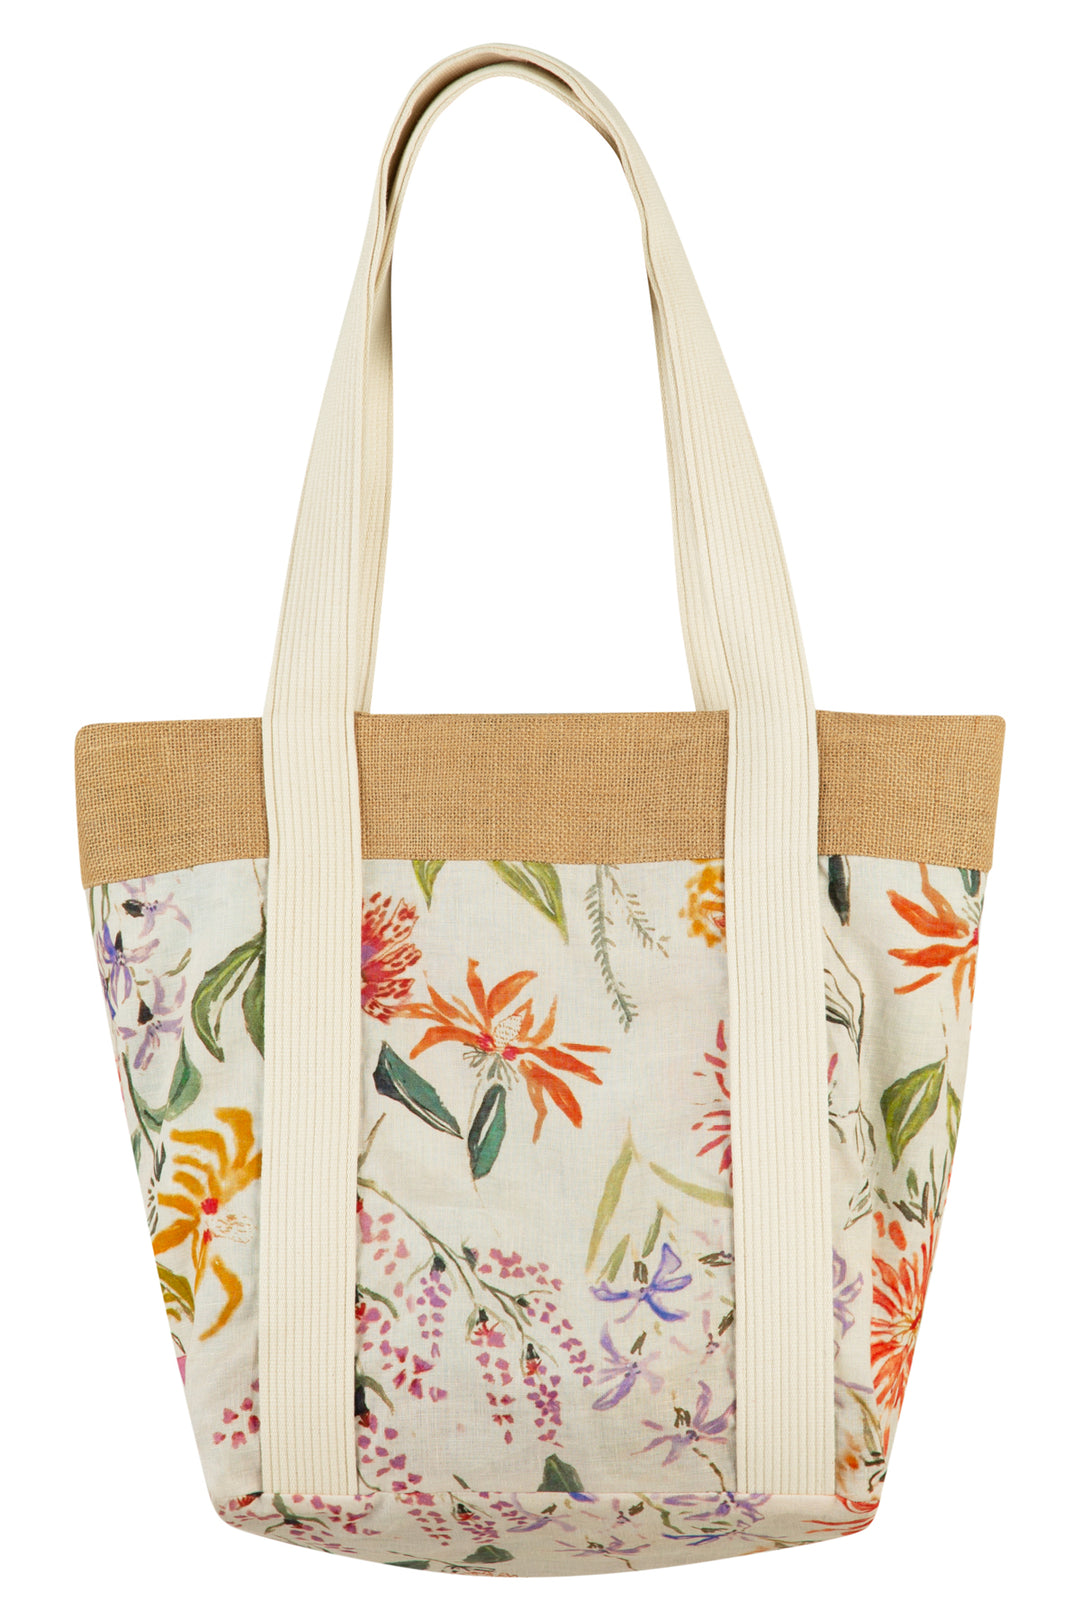 Tote-ally Summer Tote Bag - Vintage Curate (by Trelise Cooper) Bags Coop   